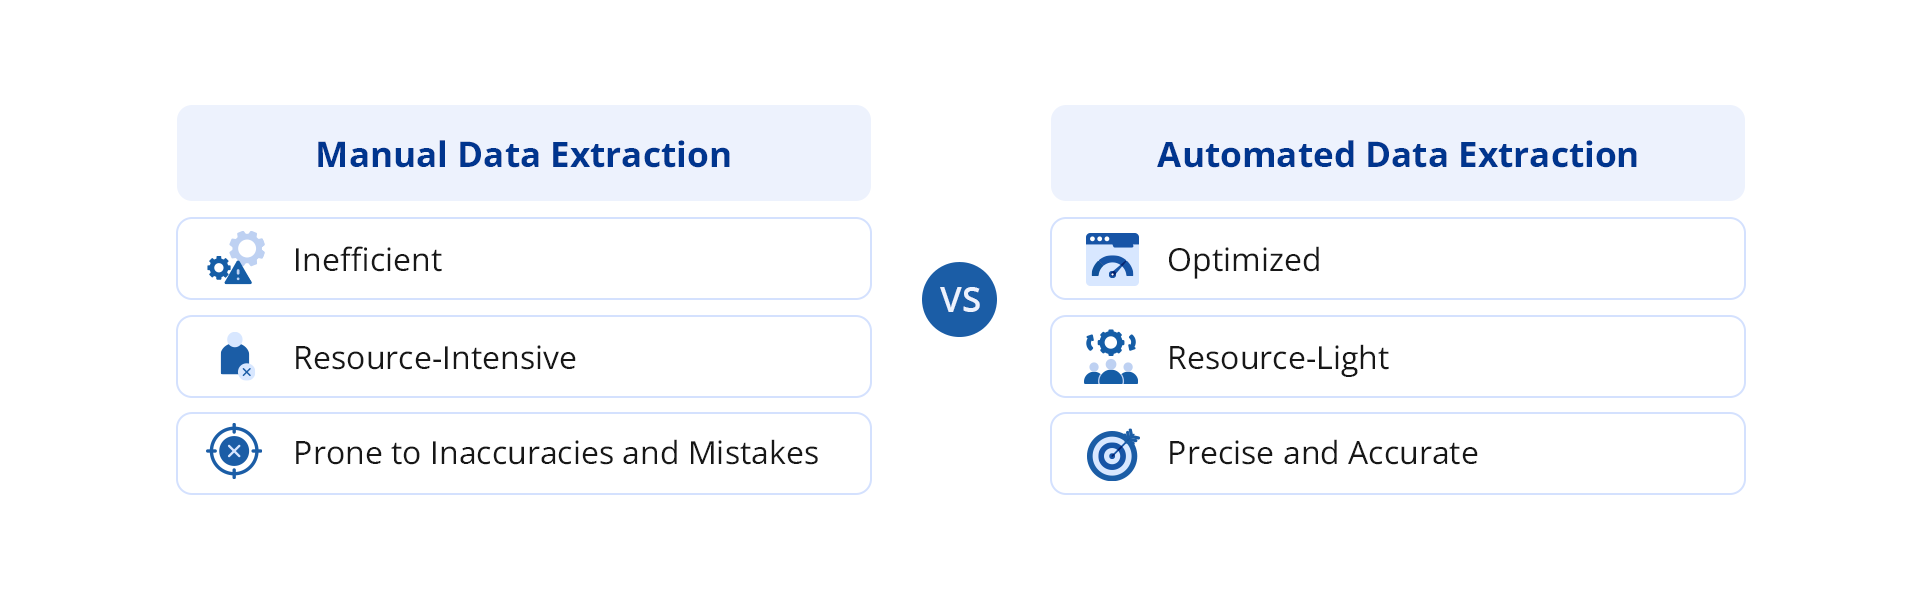 A comparison between manual and automated data extraction.